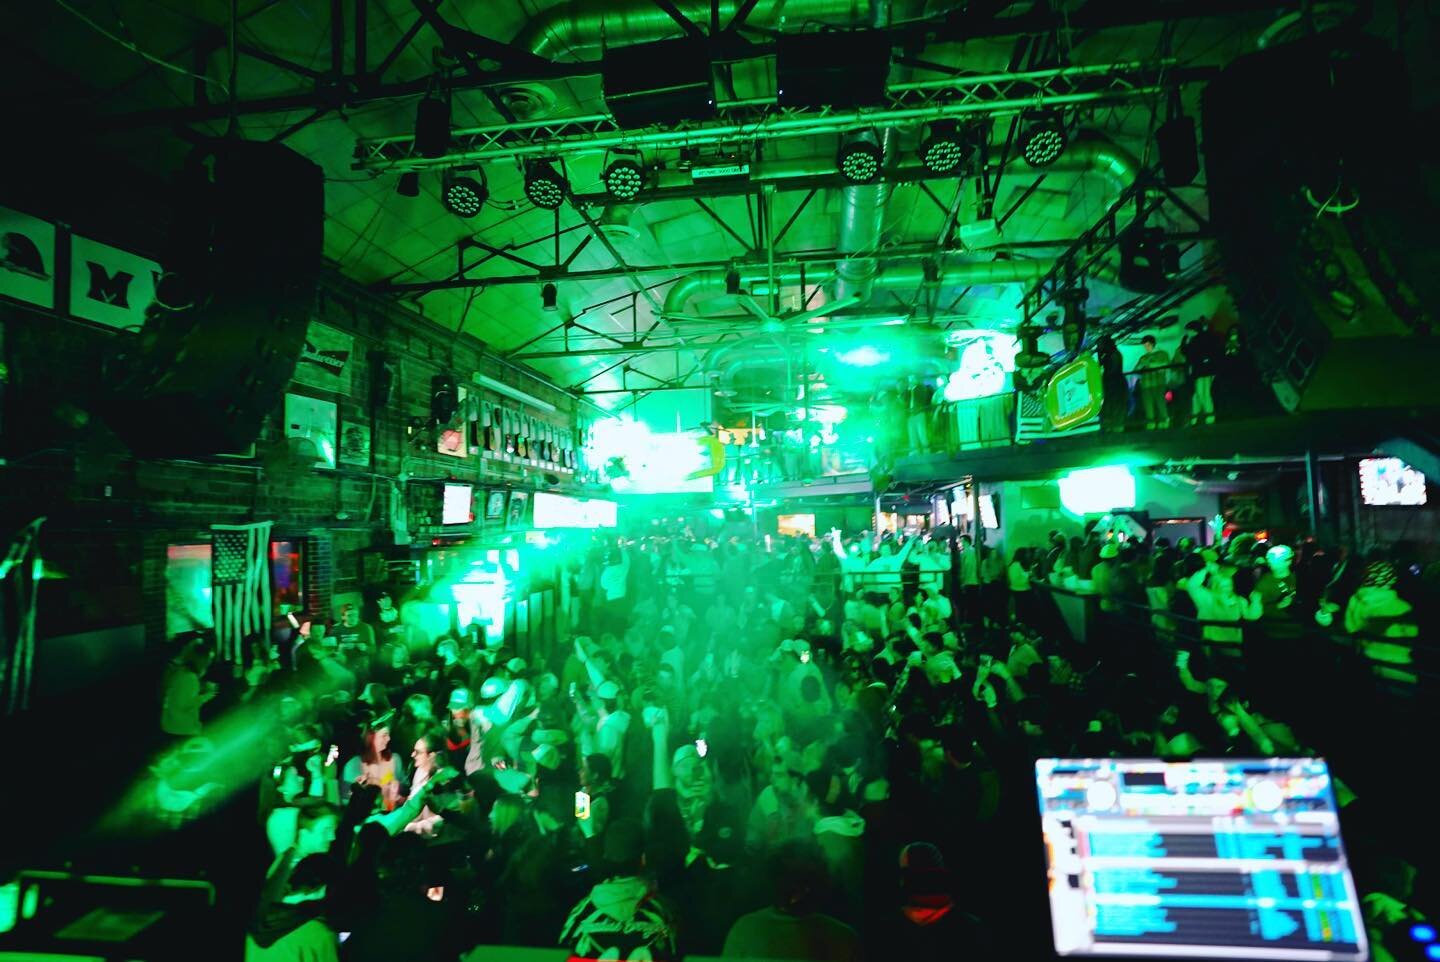 Naturally, I am behind on posting this weeks events but I estimate this was about 6:30am in the morning. #greenbeerday #weddingdj #dj #indianpolisdj #djlife #events #wedding #weddingvendor #weddingseason #engagedindy #indianadj #midwestdj #clubdj